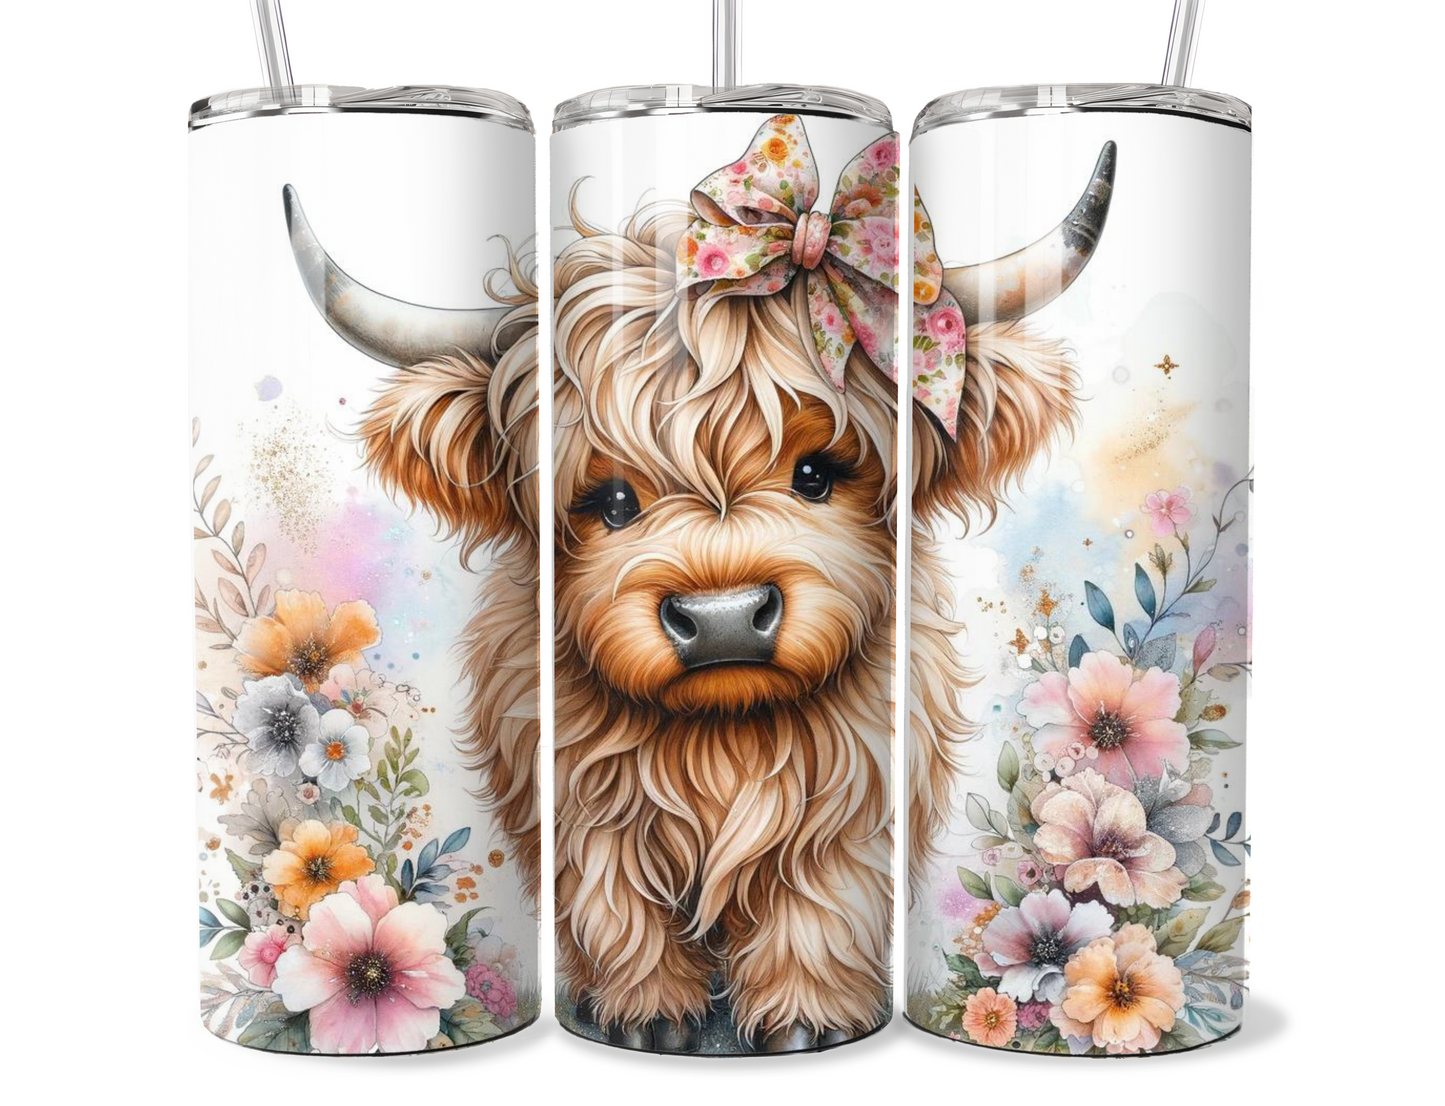 Highland cow, sublimation, cow design, insulated metal tumbler.